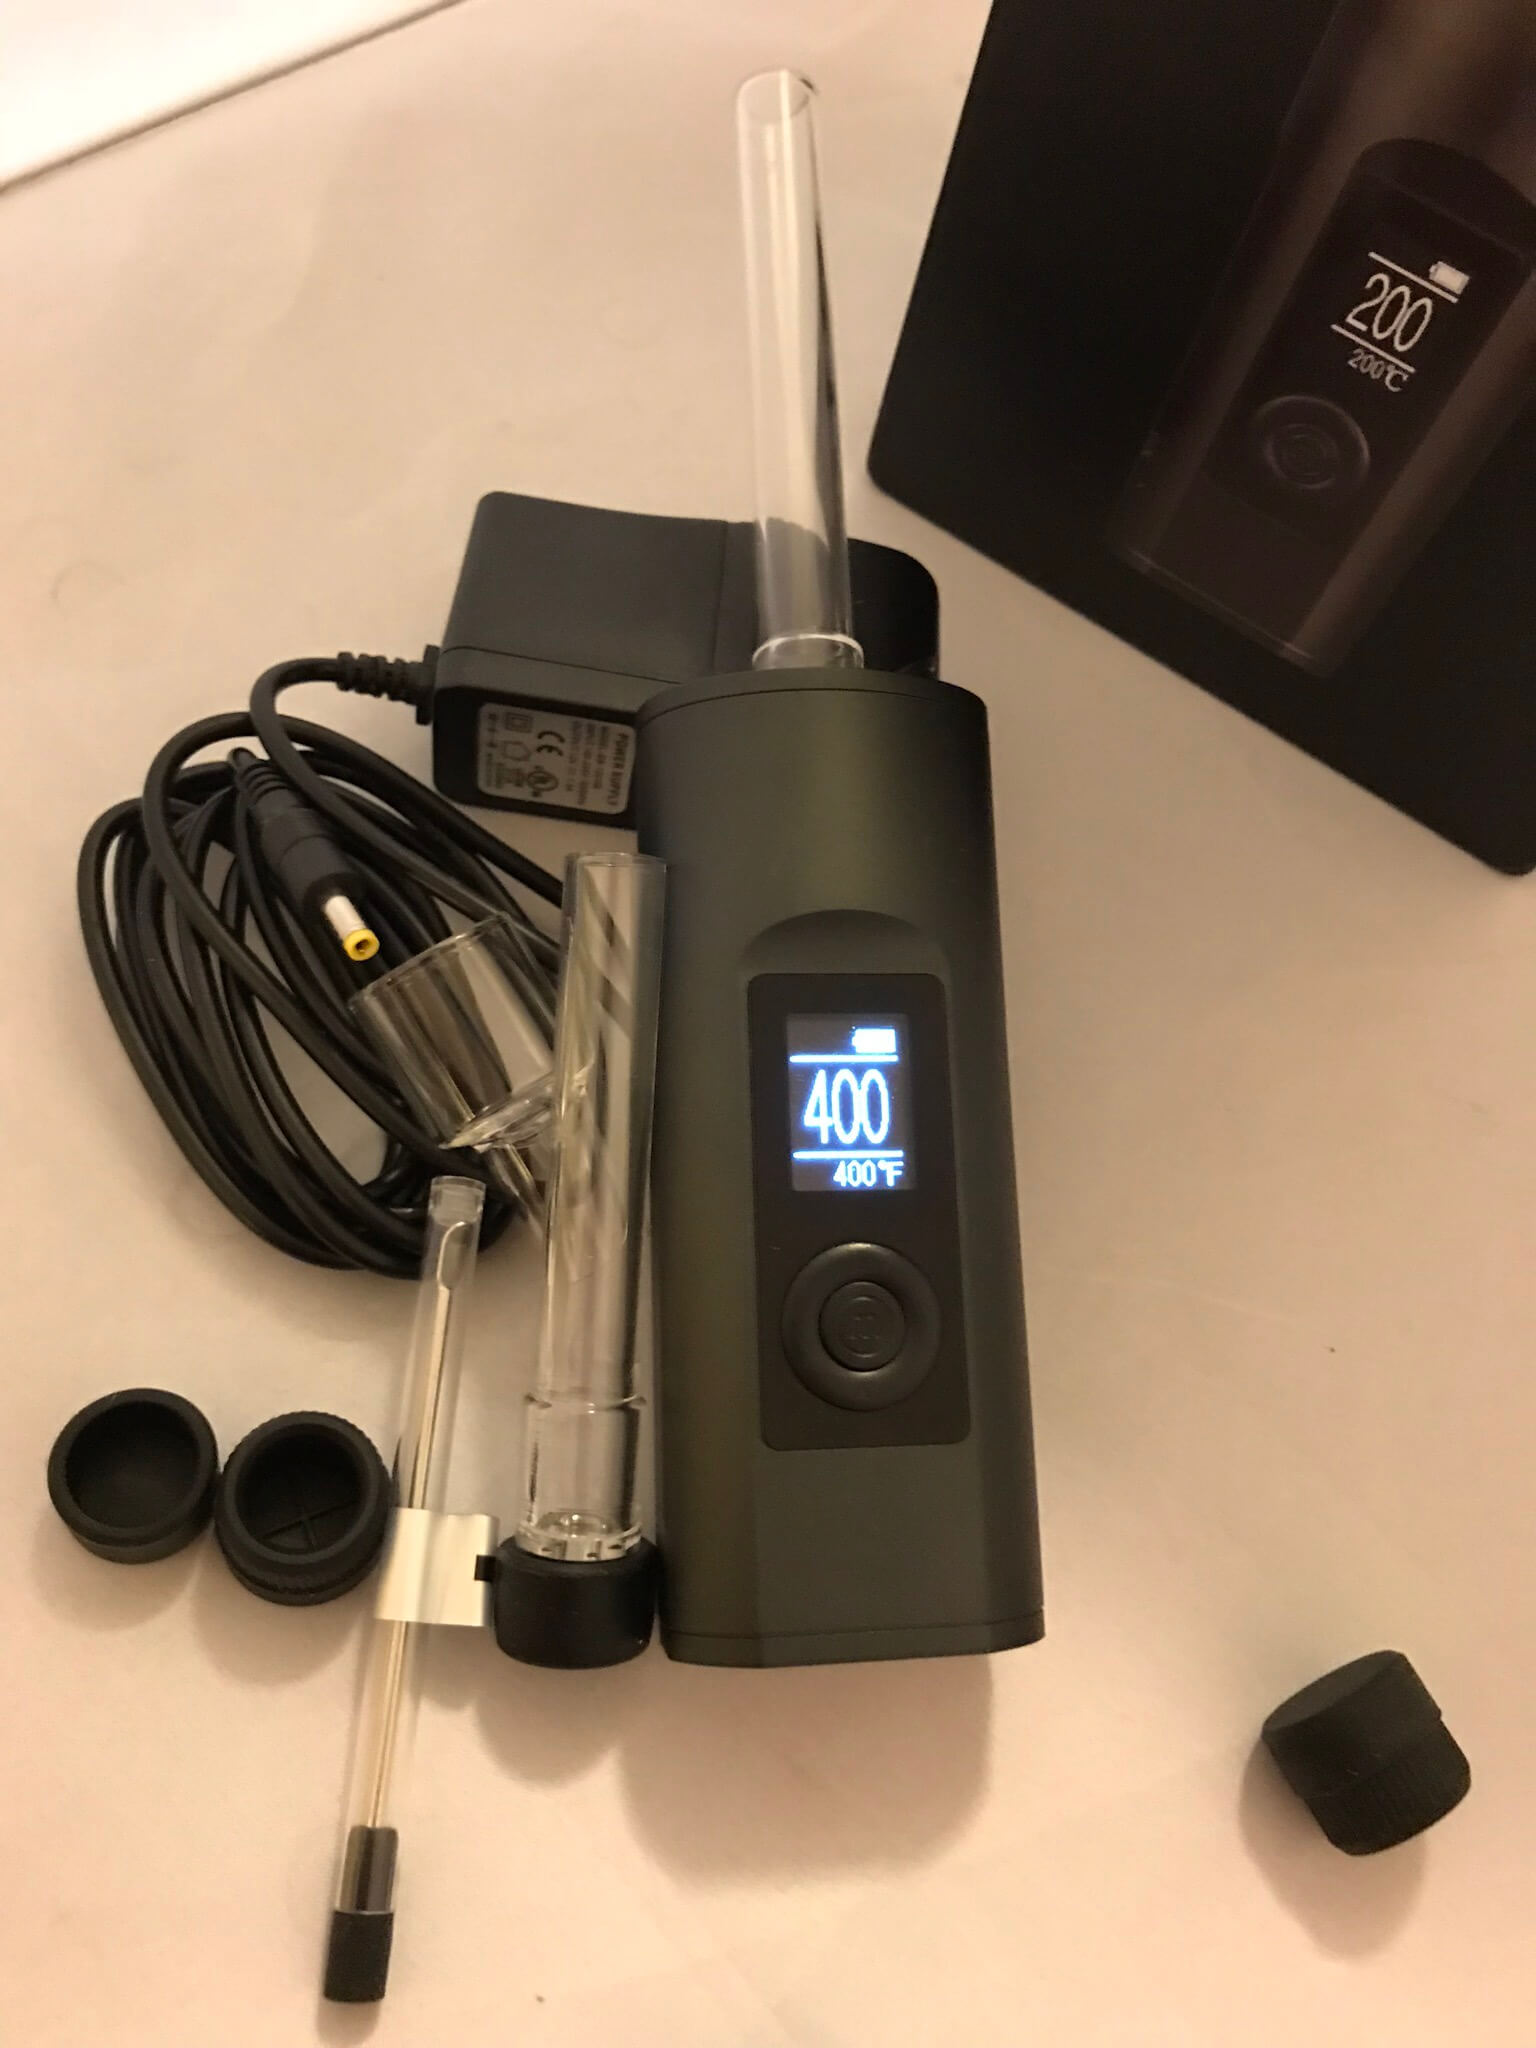 Refurbished Arizer SOLO 2 - The Best Value on Arizer Vaporizers